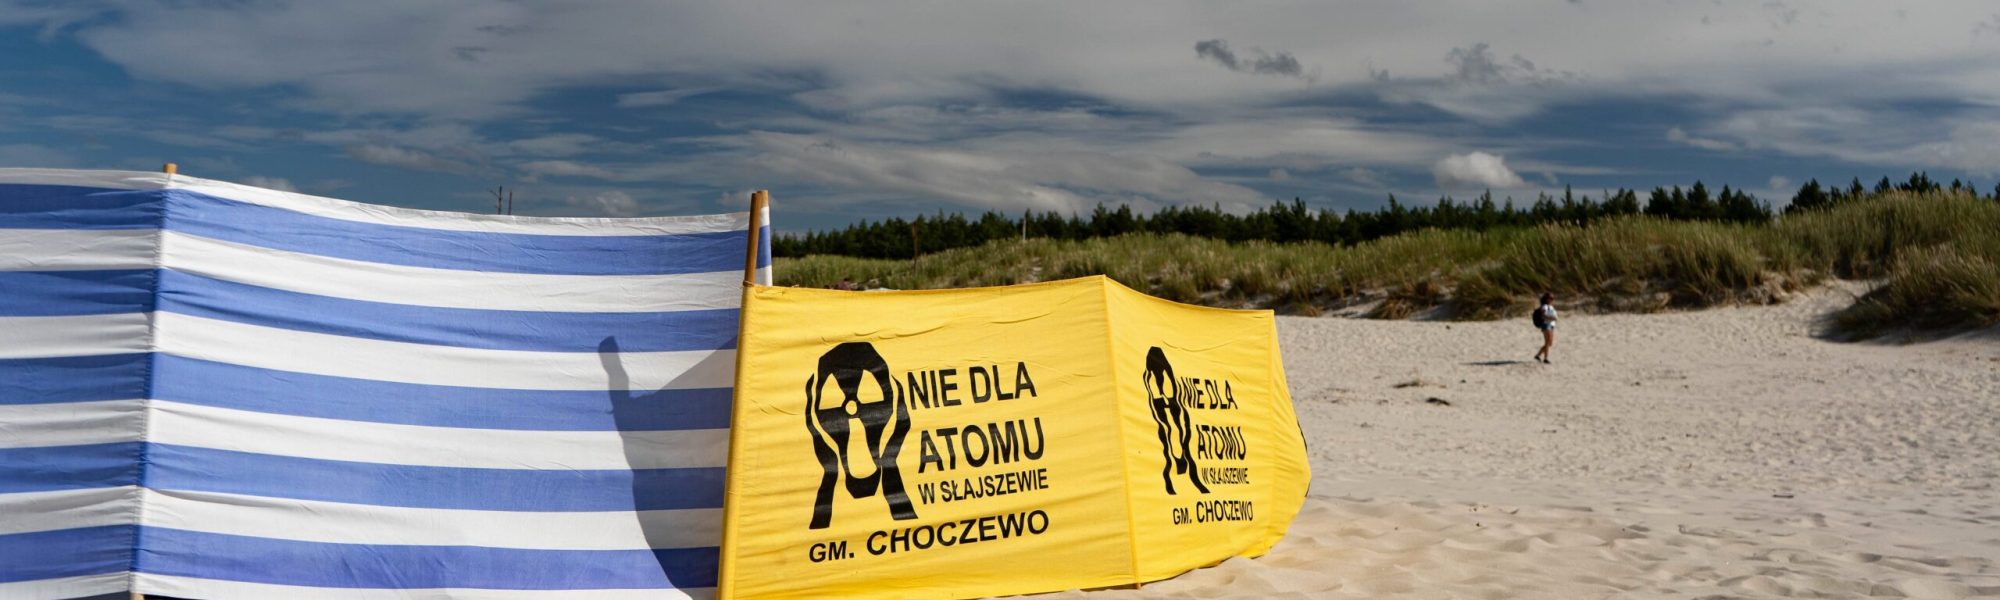 As Poland pushes ahead with first nuclear plant, locals voice concern